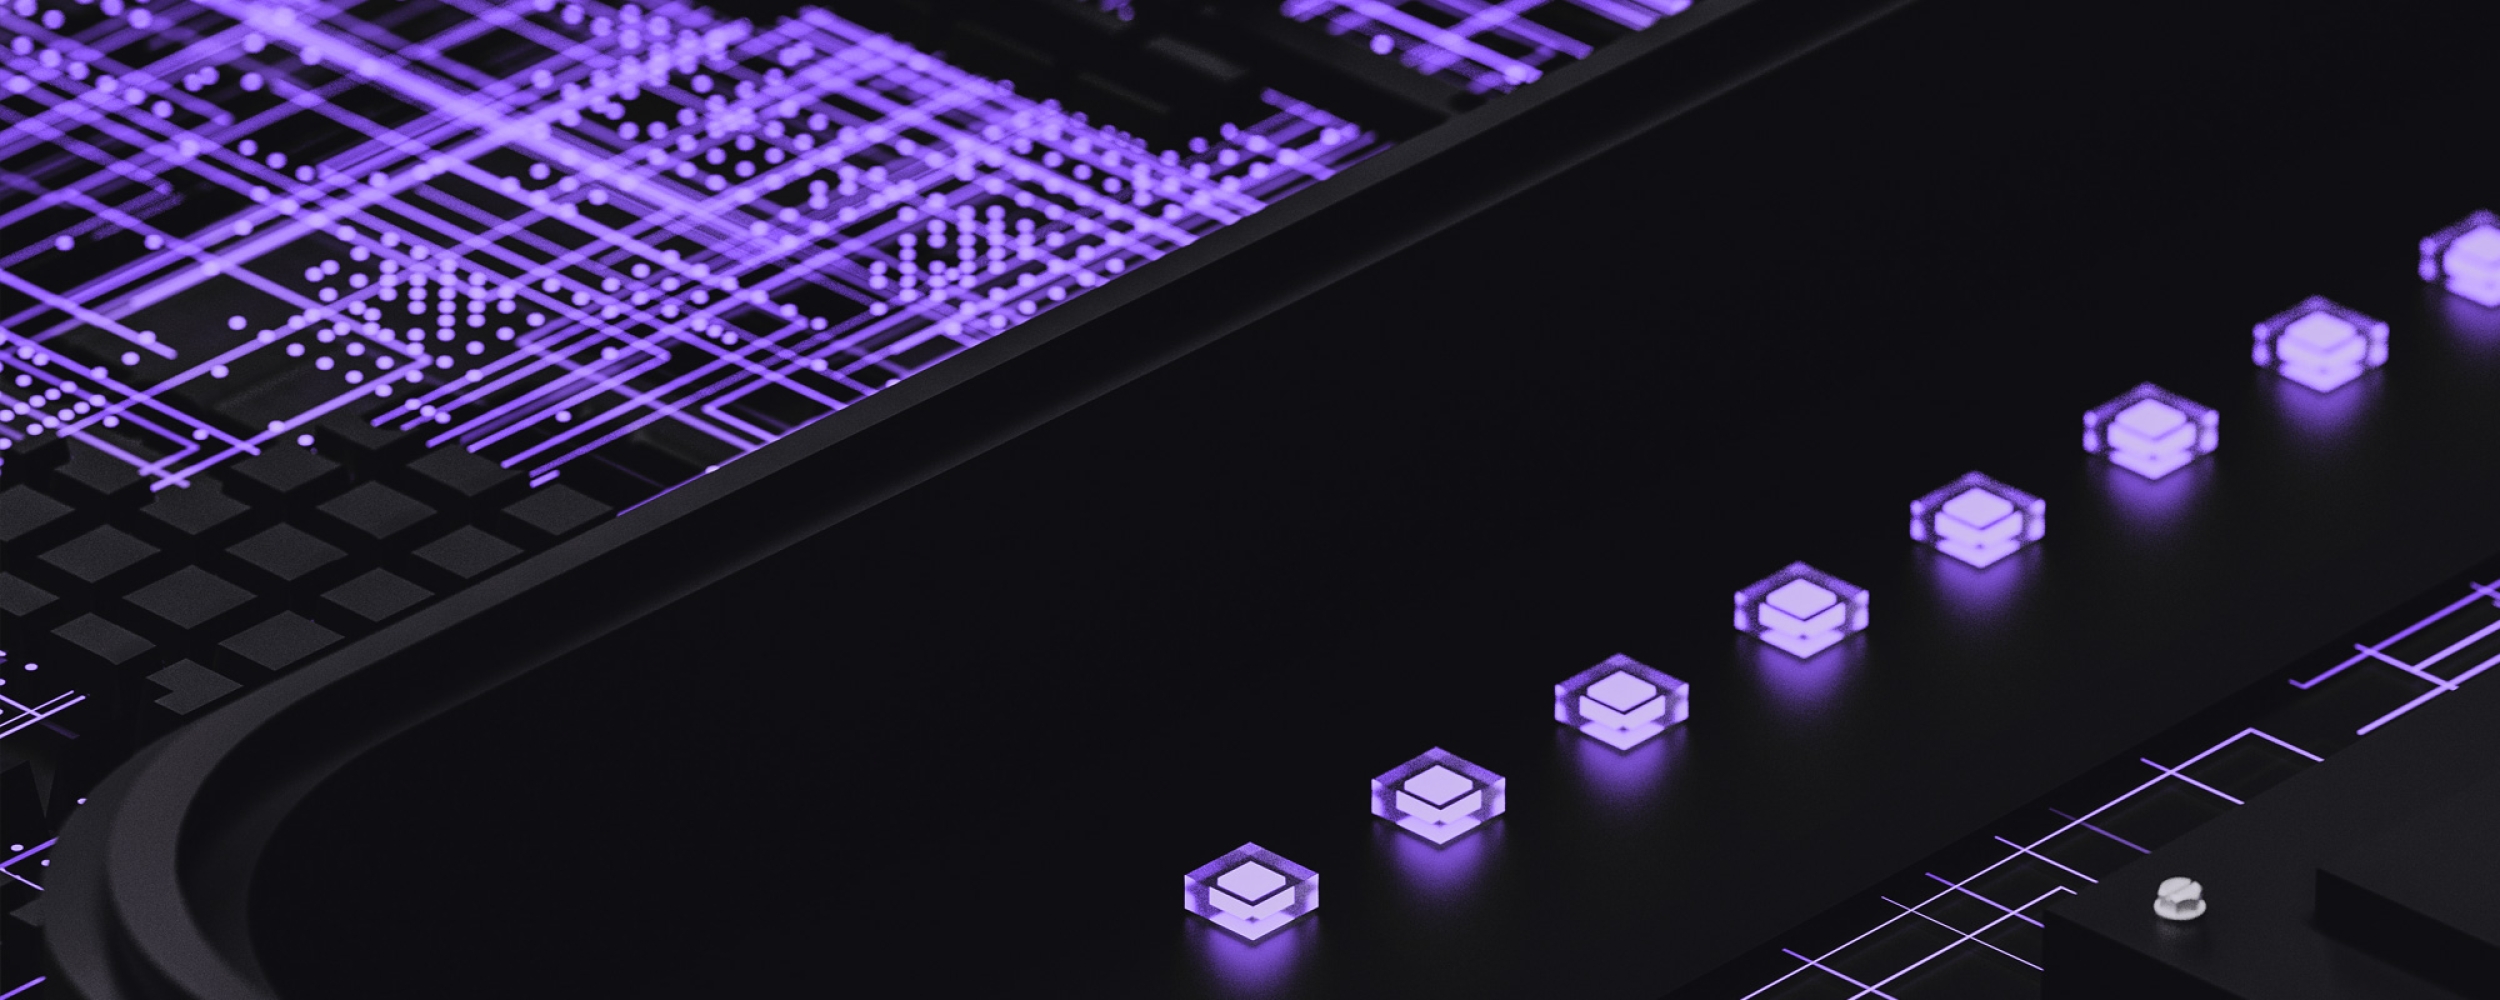 Abstract image showing technology in bright purple and black.